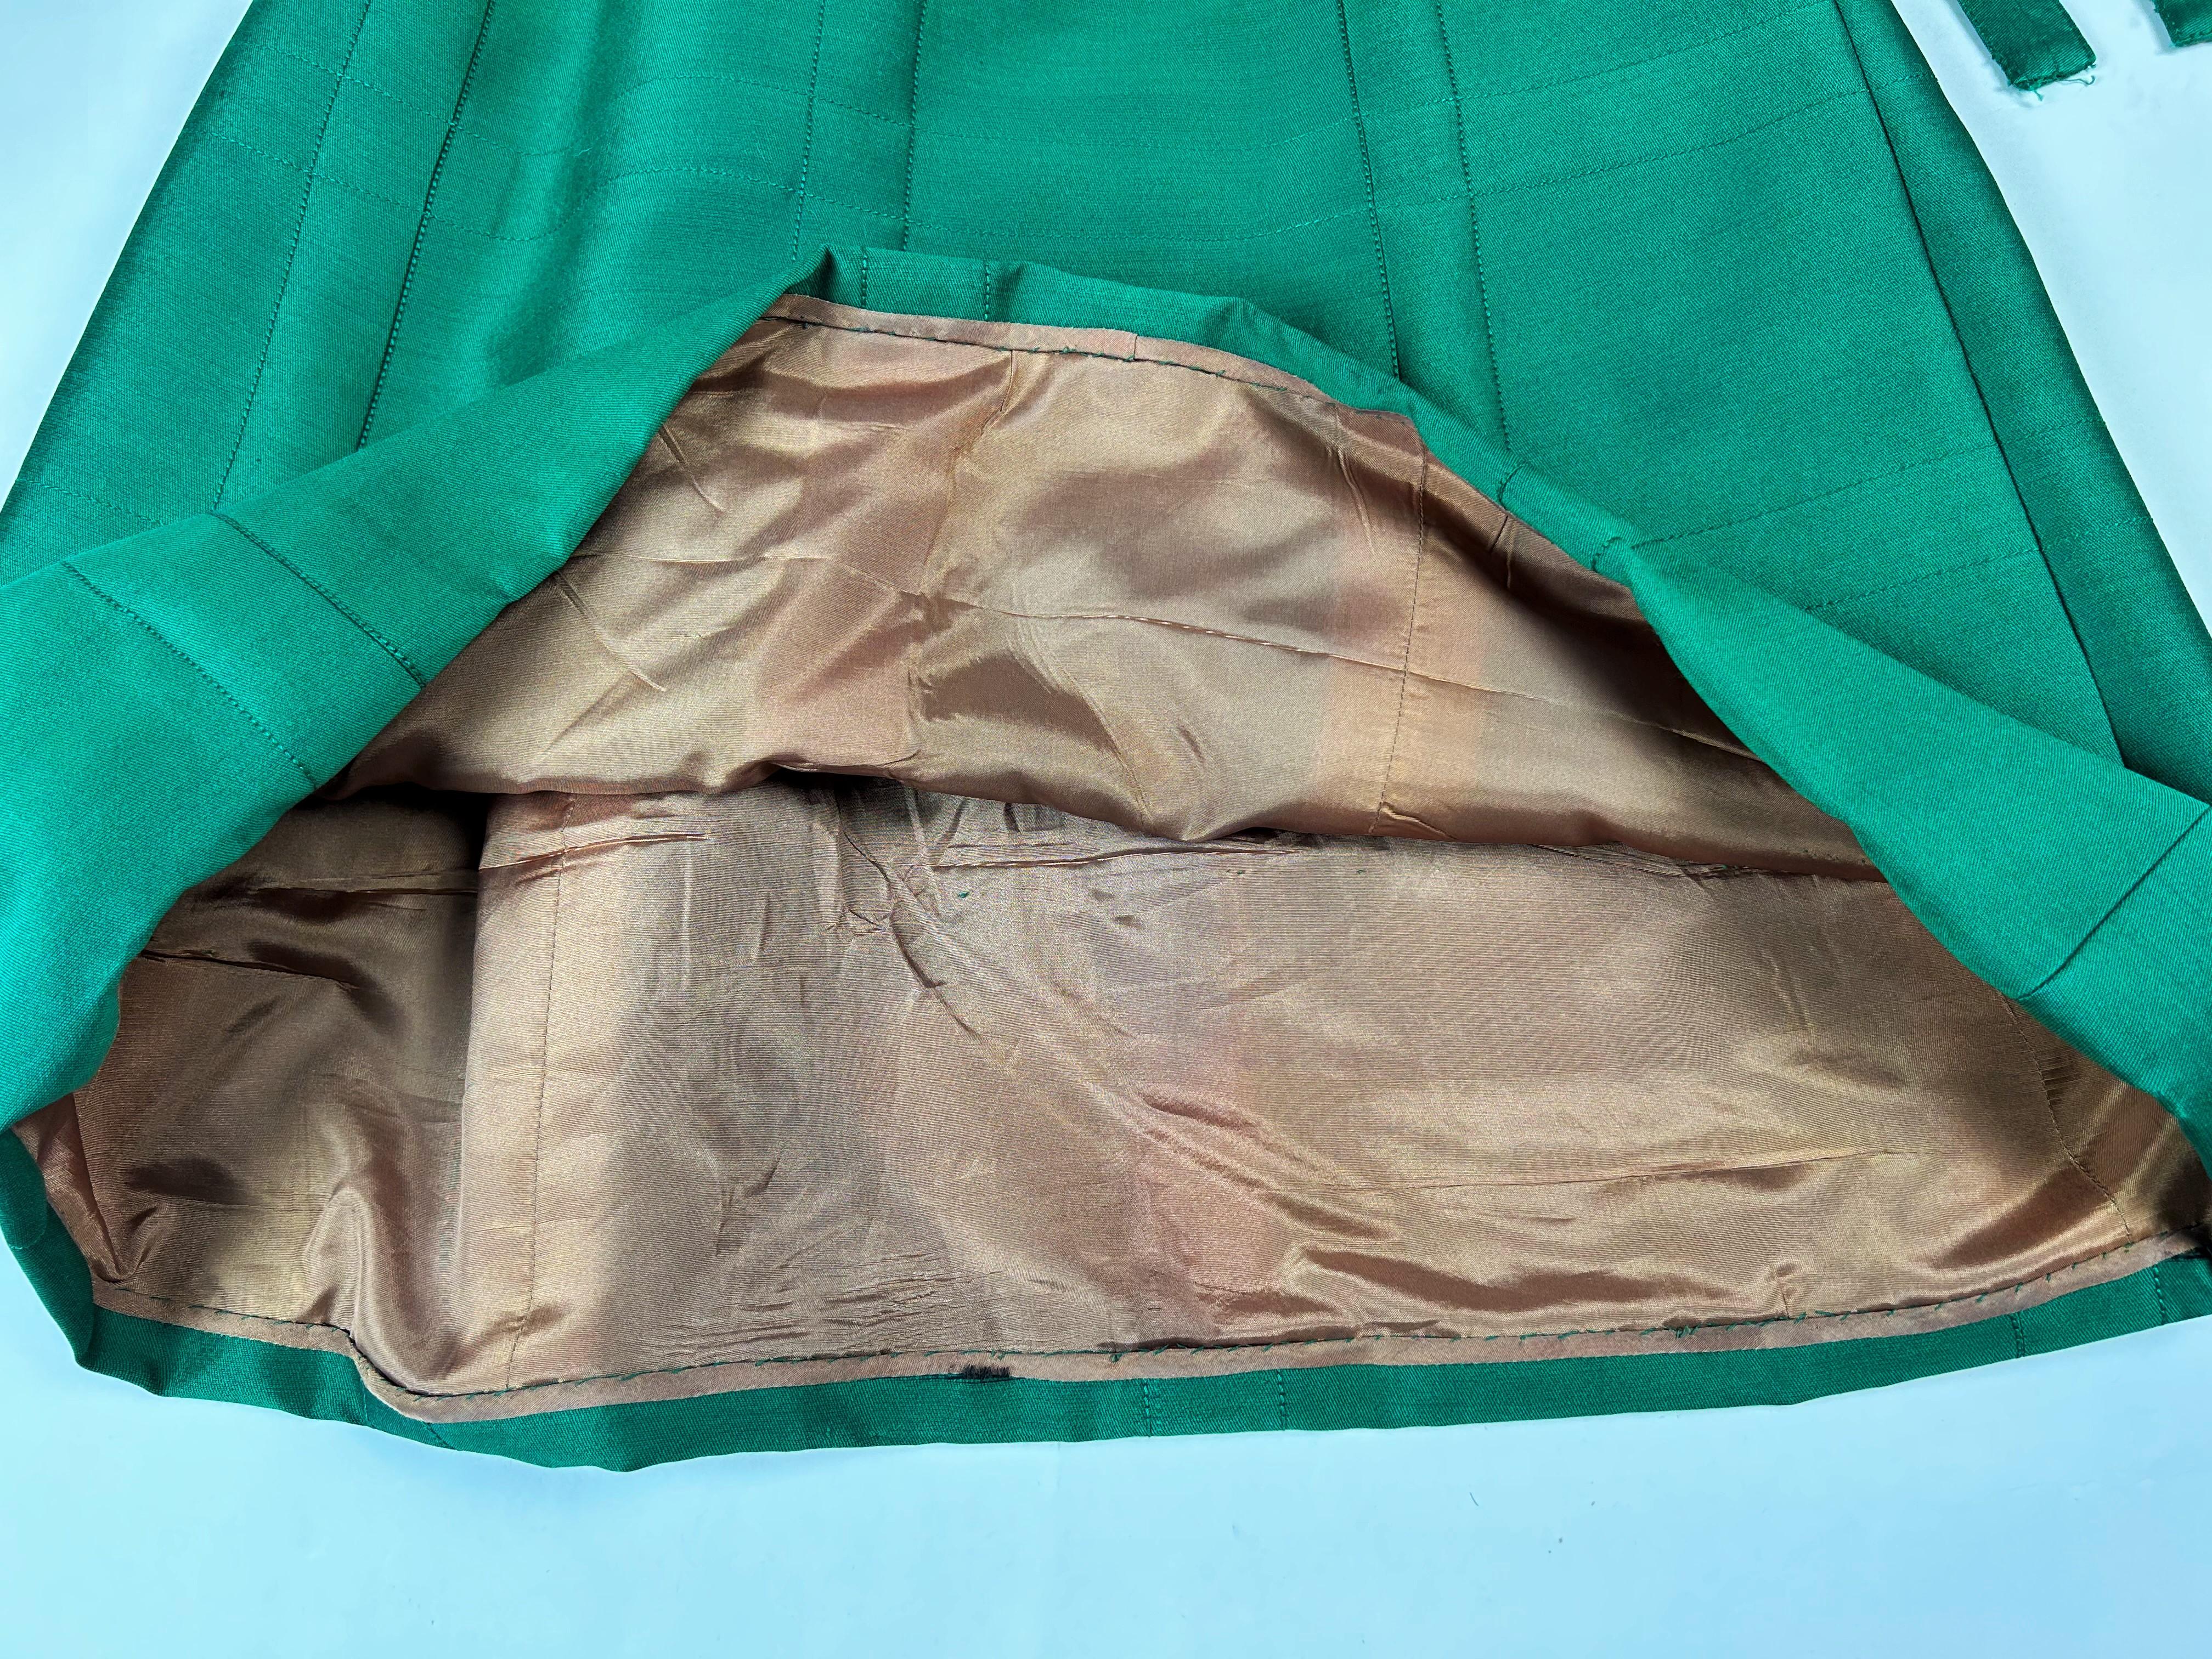 An Emerald Gazar Demi-Couture Skirt Suit by Louis Féraud Circa 1968-1972 For Sale 3